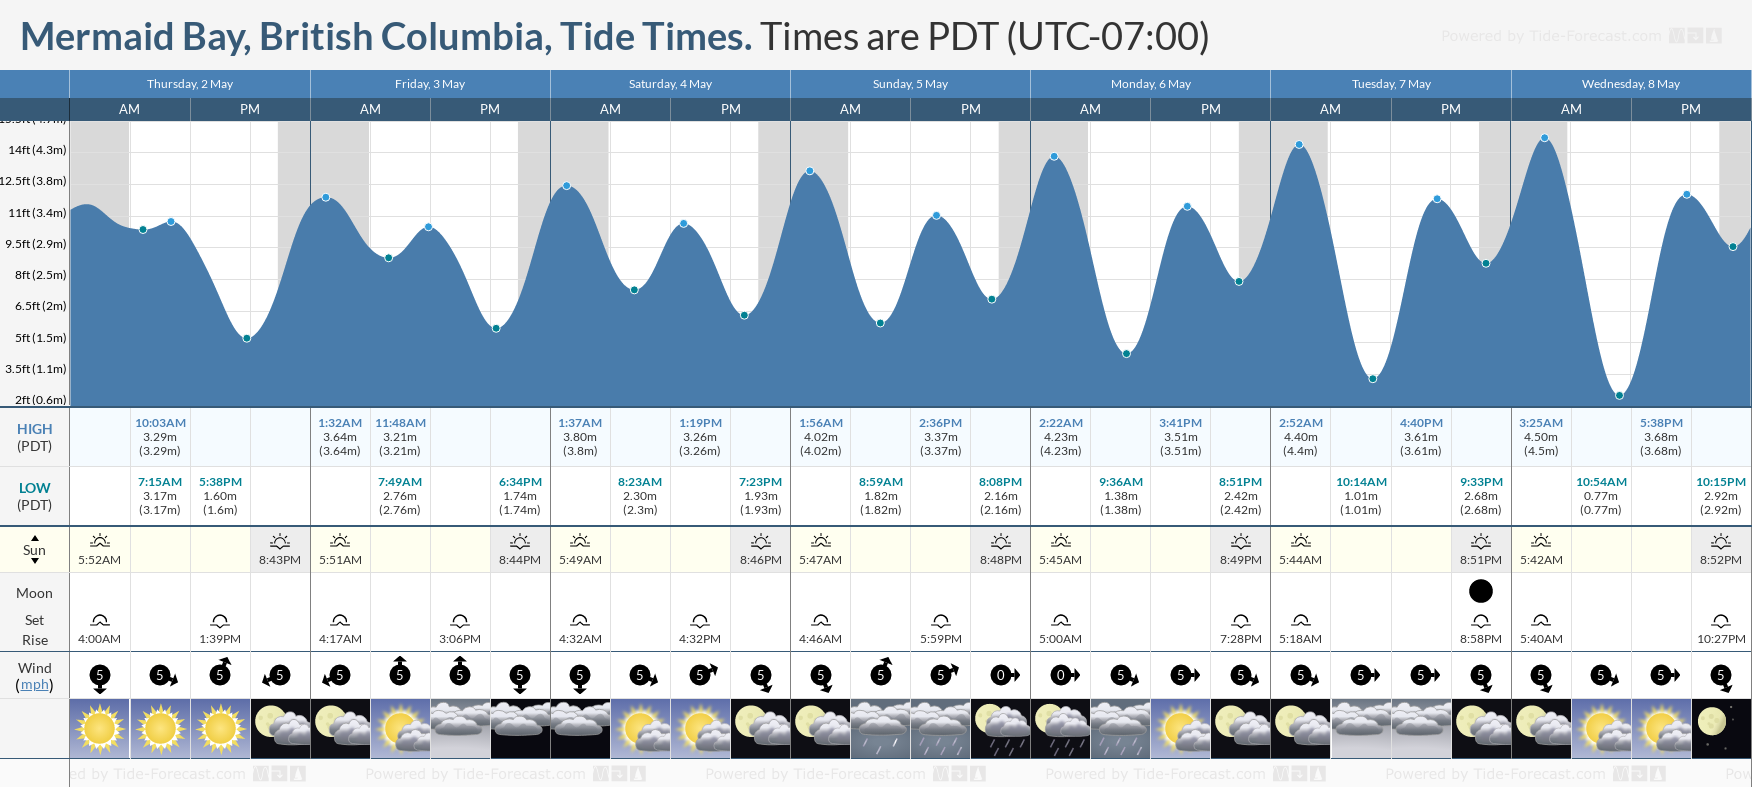 Mermaid Bay, British Columbia Tide Chart including high and low tide times for the next 7 days